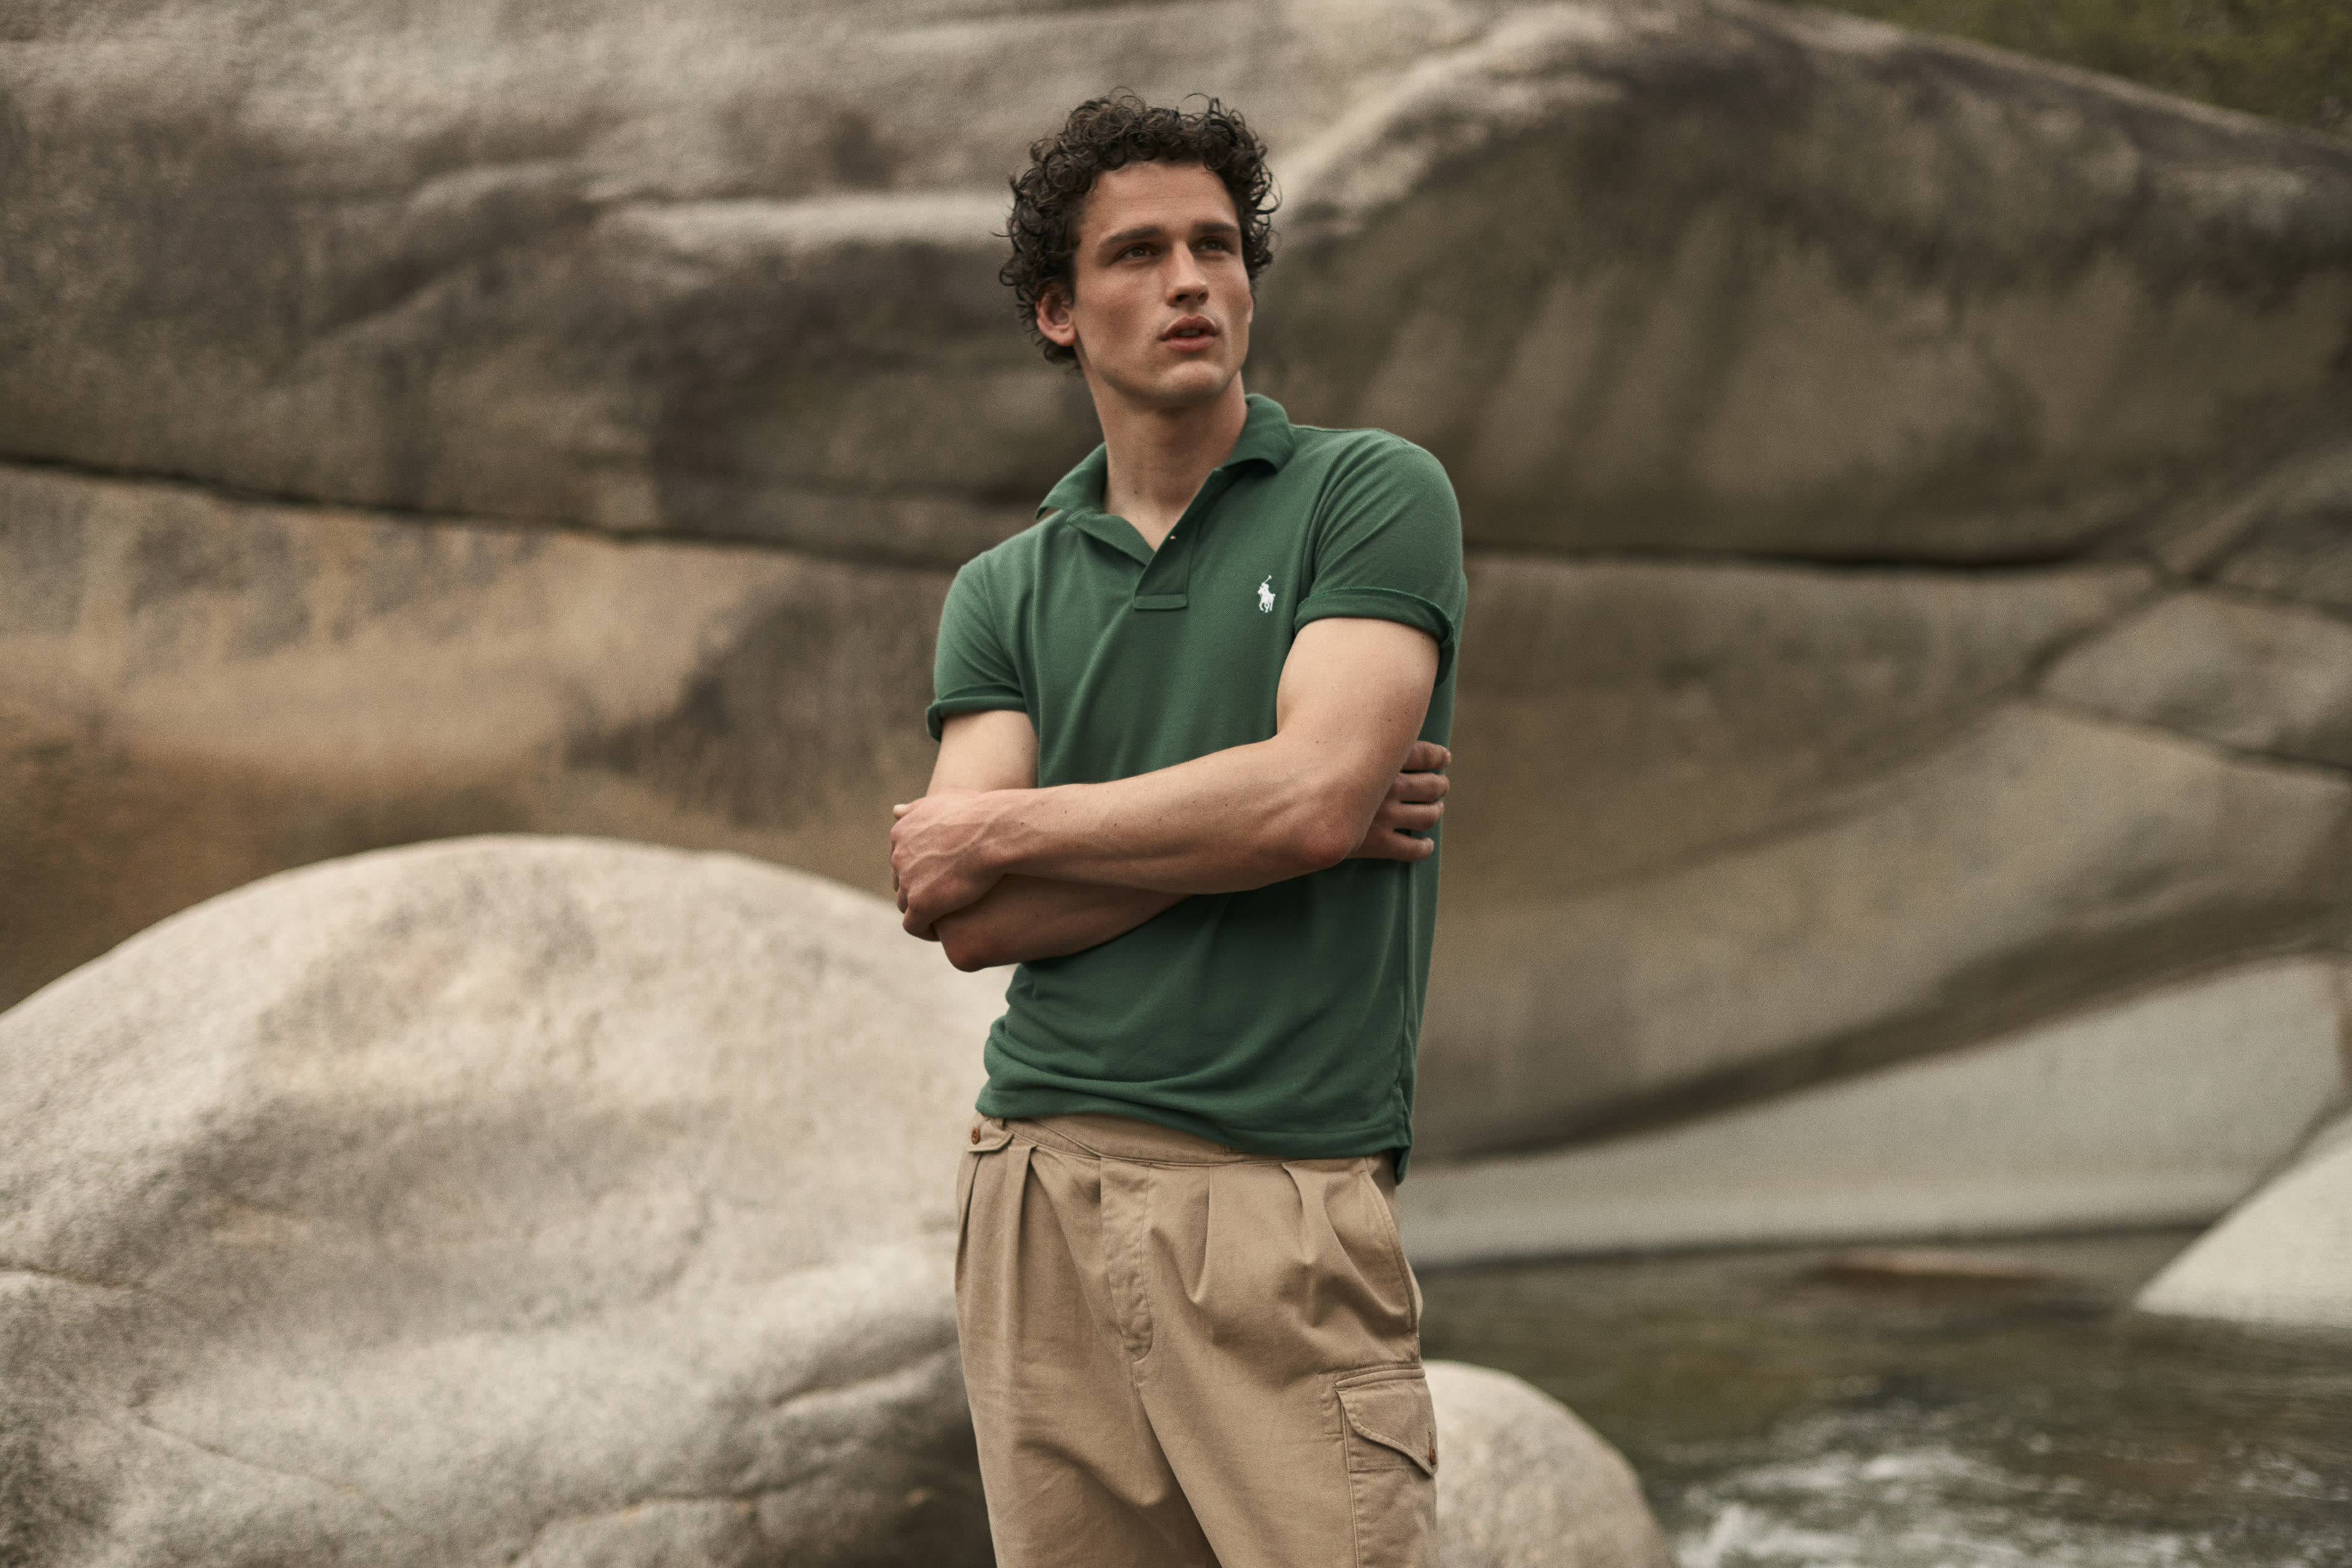 RALPH LAUREN UNVEILS THE EARTH POLO